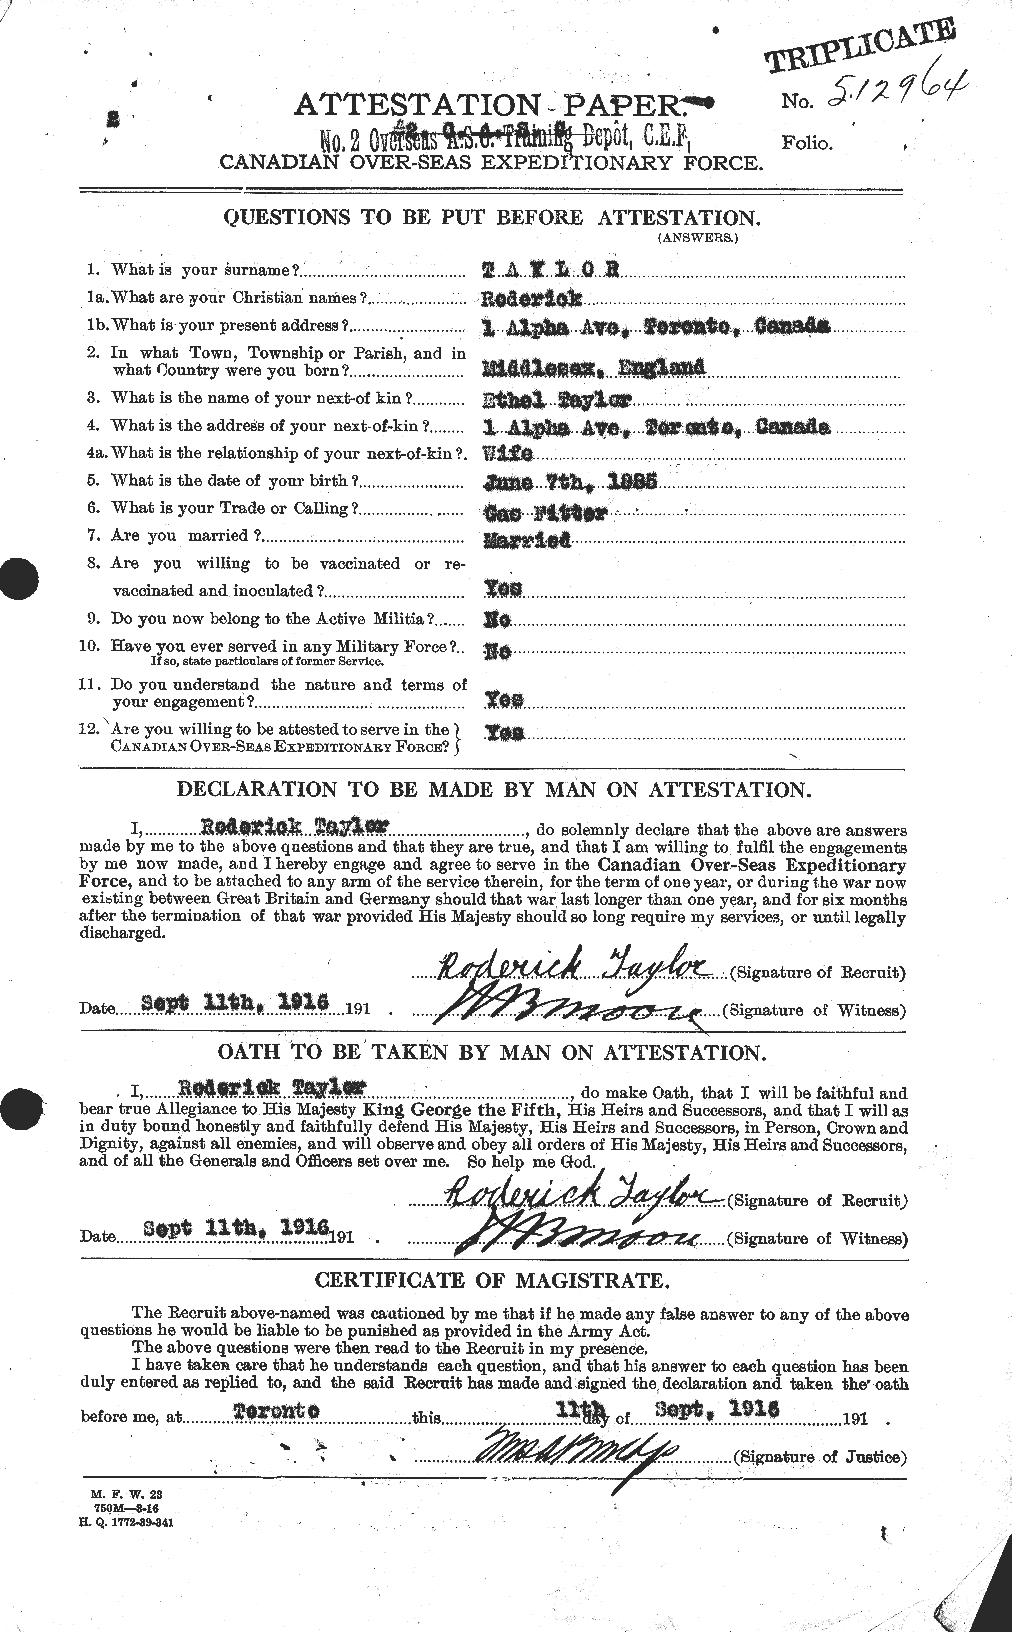 Personnel Records of the First World War - CEF 627502a